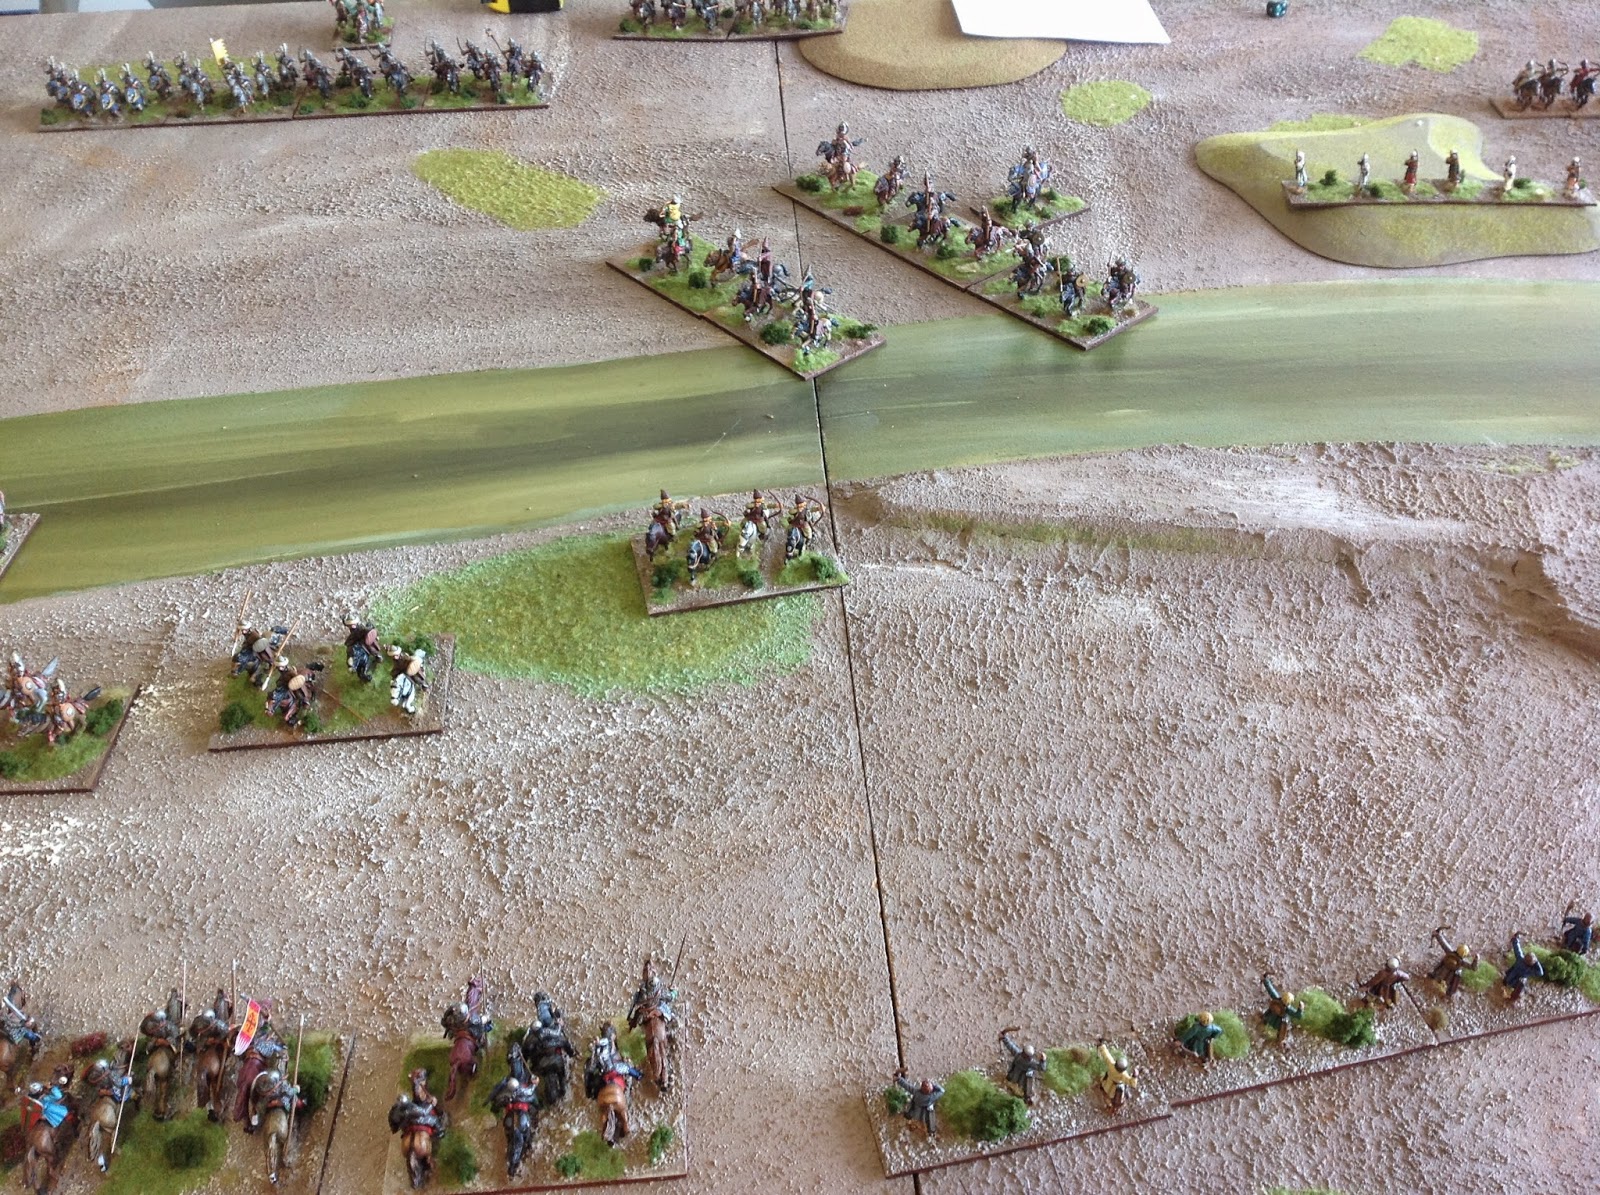 Band of Wargame Brothers: Battle of Harran 1104